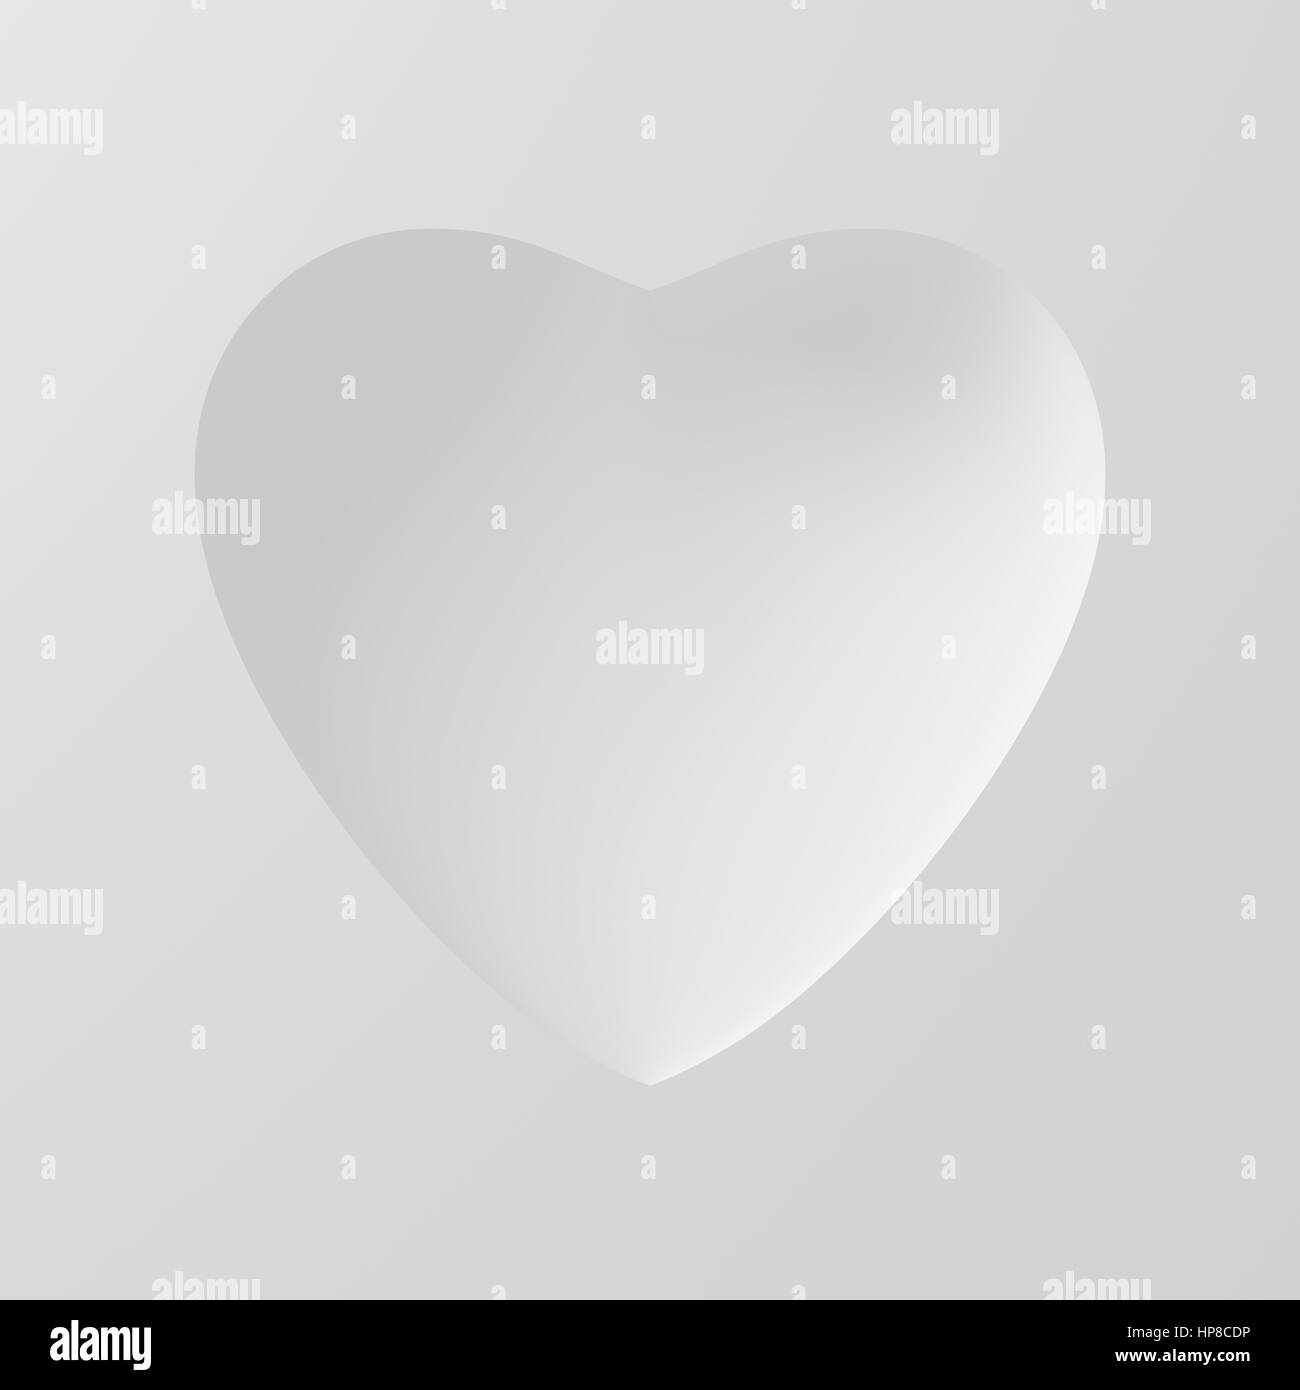 Concave Shape Of White Heart On White Background. 3D Illustration. Stock Photo